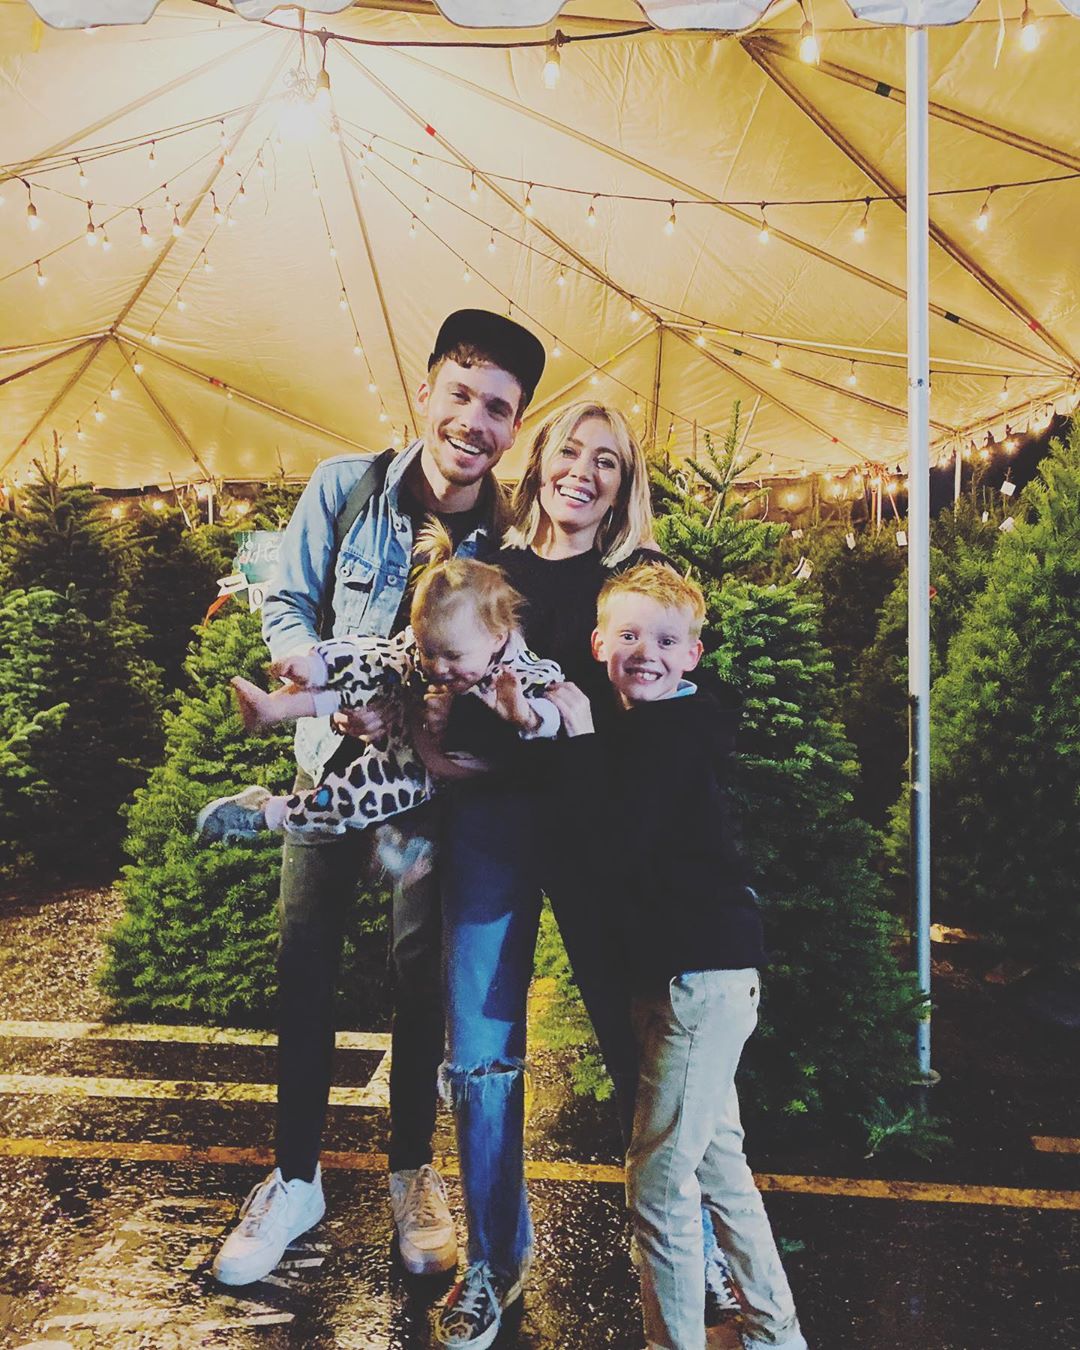 Hilary Duff and Matthew Koma Celebrities Picking and Decorating Christmas Trees With Their Kids